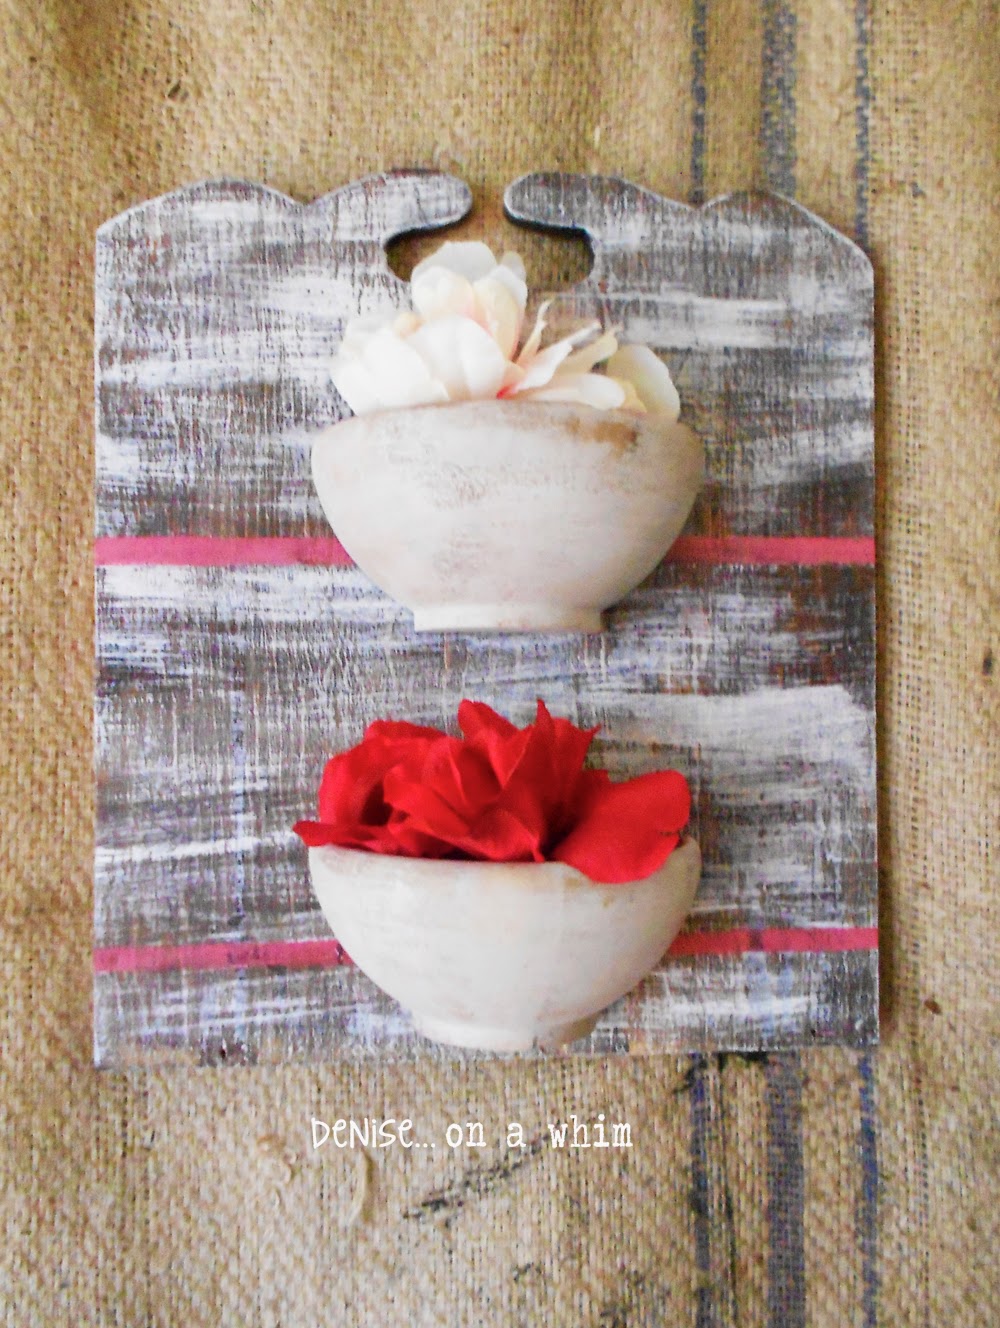 Wooden bowls, cut in half, become a small wall ogranizer or display